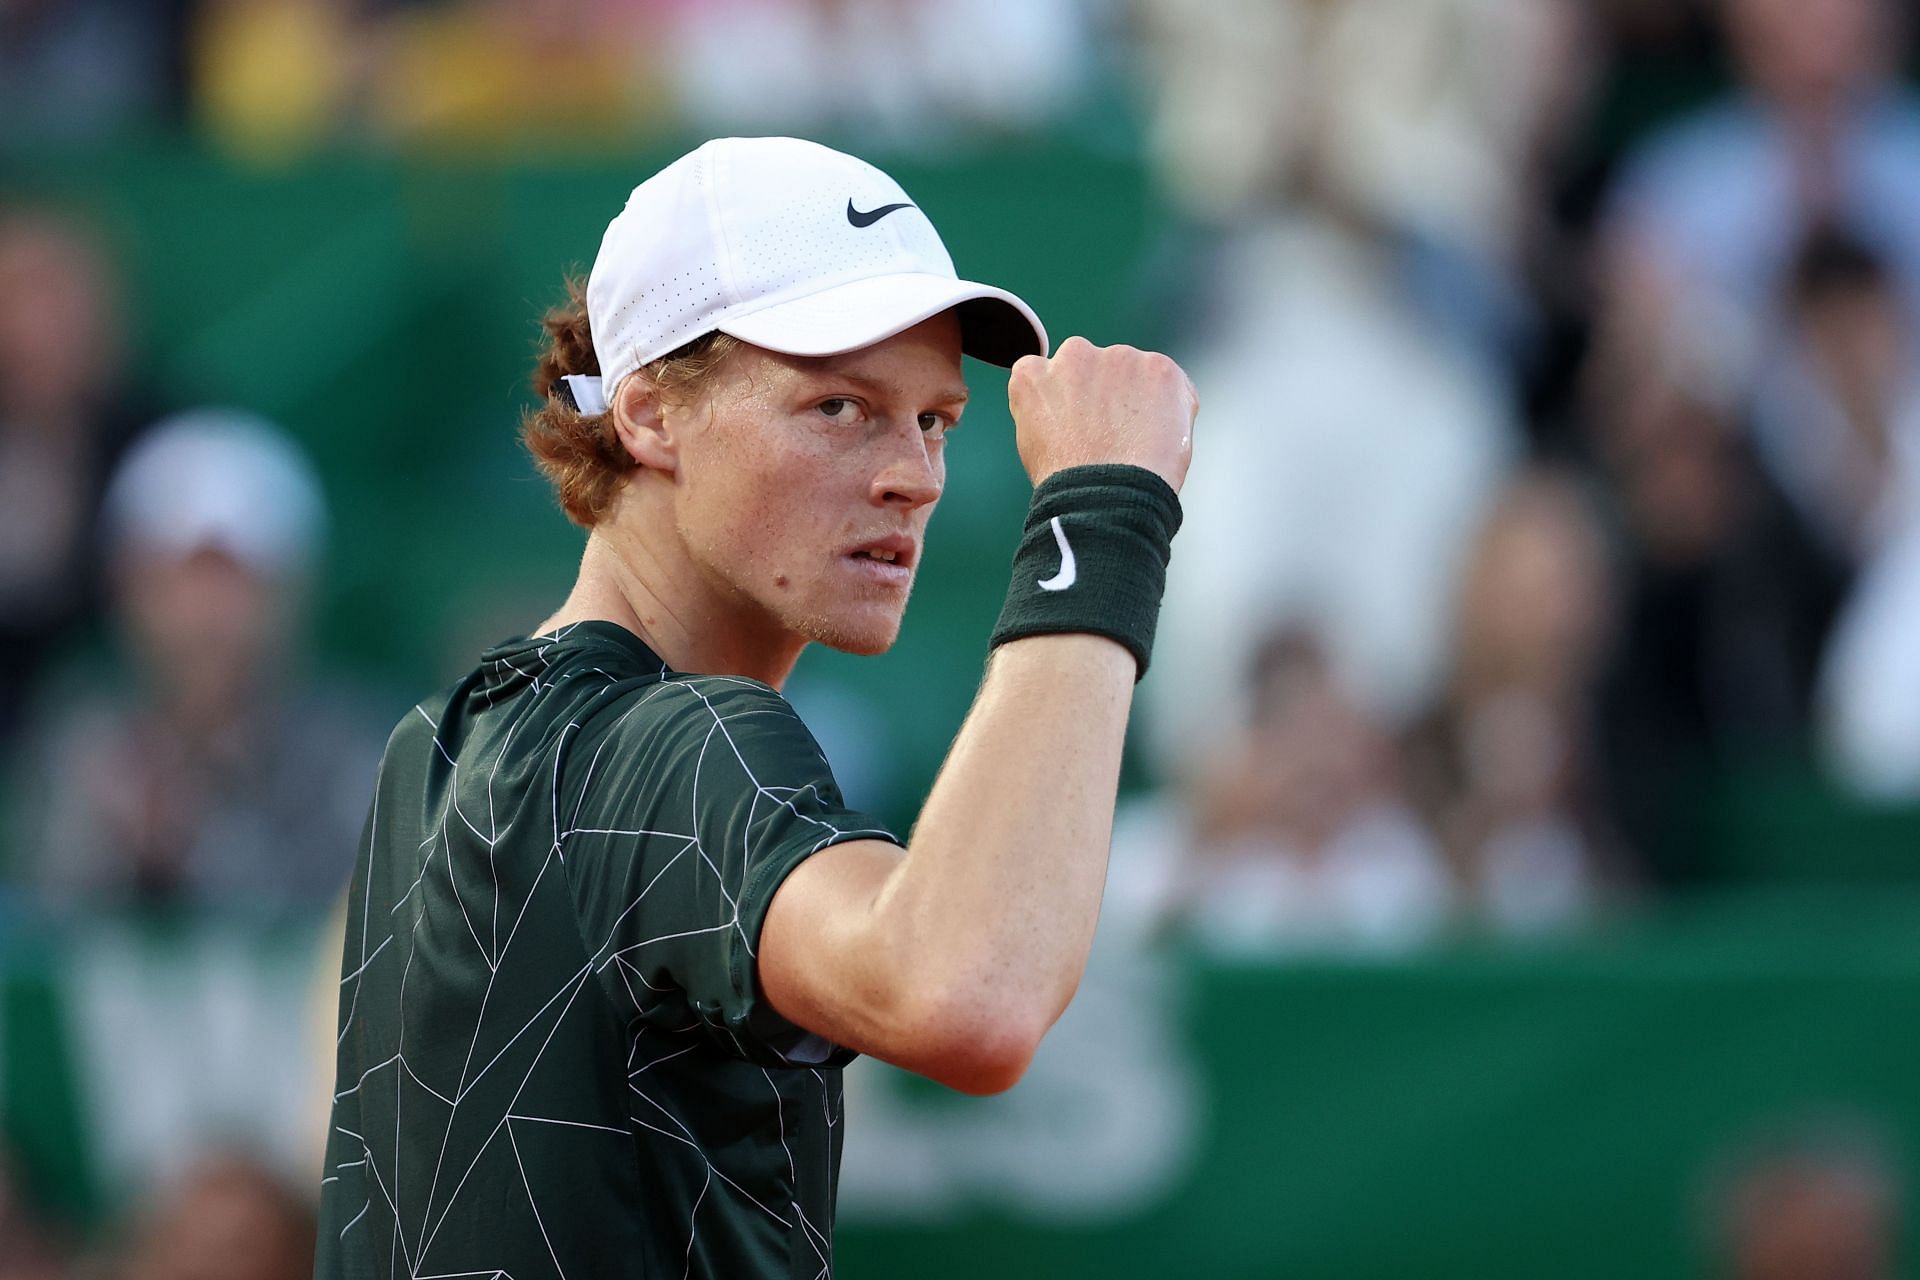 Sinner at the 2022 Rolex Monte-Carlo Masters